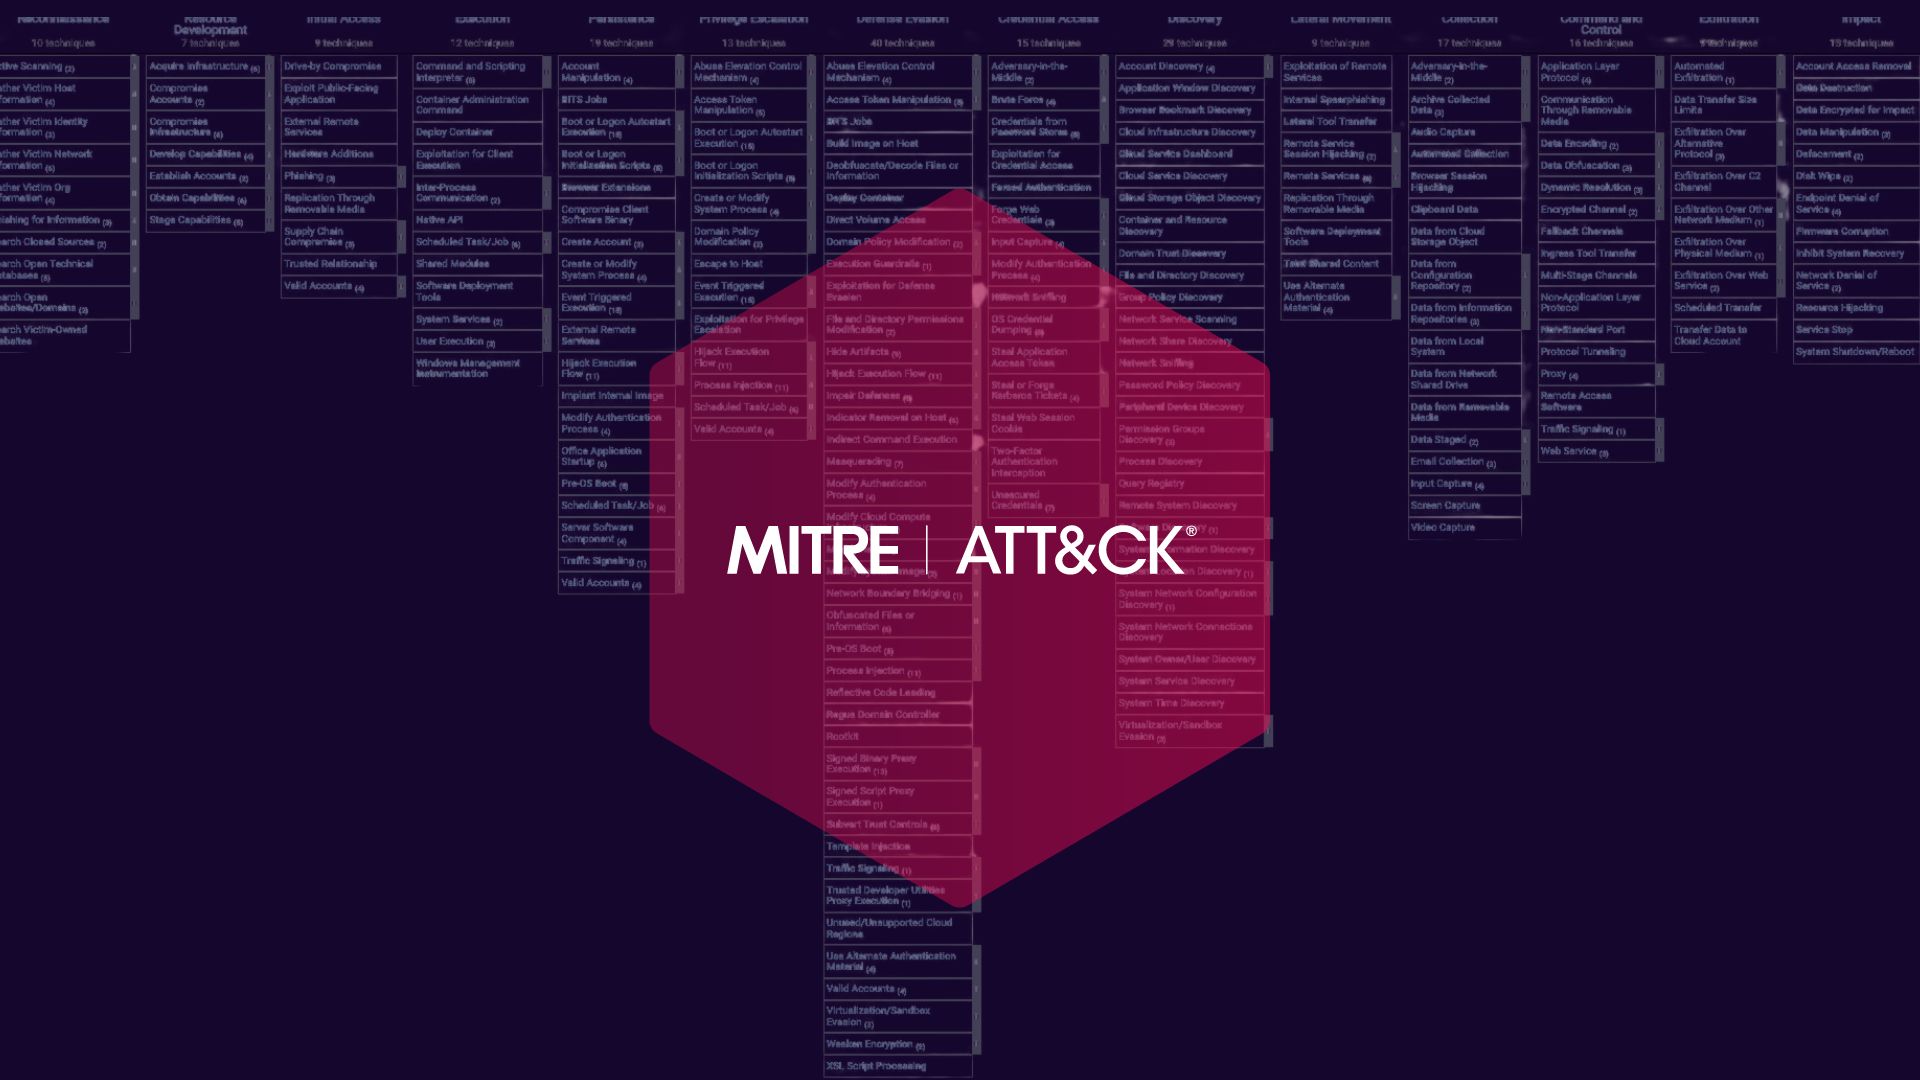 Cybersecurity training aligned with the MITRE ATT&CK framework